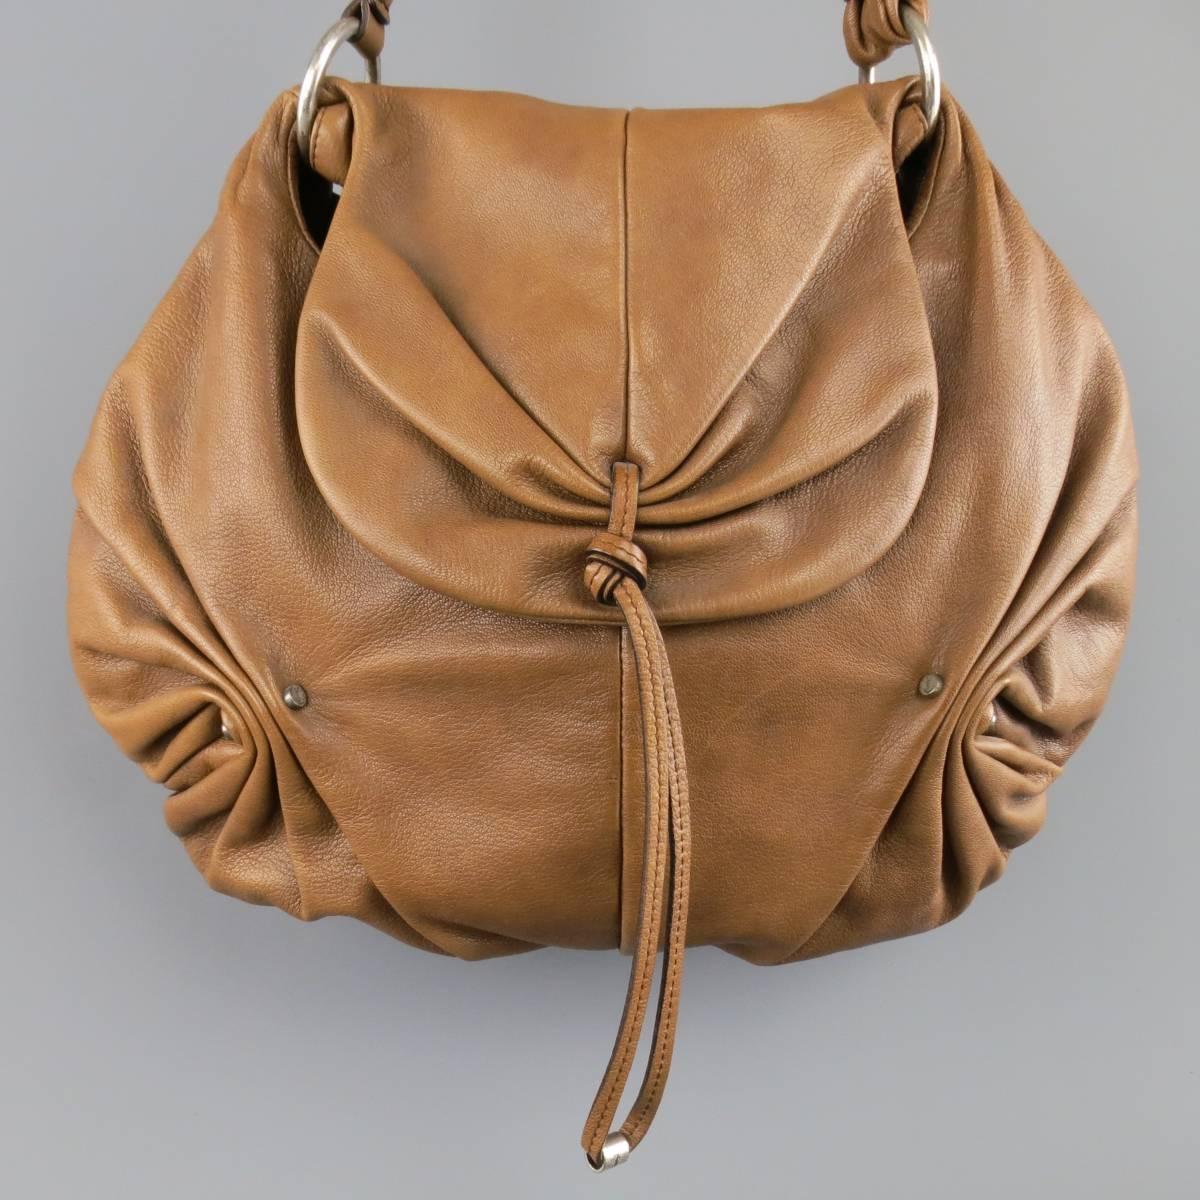 Vintage Fall 2003 YVES SAINT LAURENT by TOM FORD shoulder bag comes in a soft, textured, light brown leather and features a gathered flap snap closure, ruched side details with hardware, and shoulder strap with buckle. Wear throughout. As-Is. Made